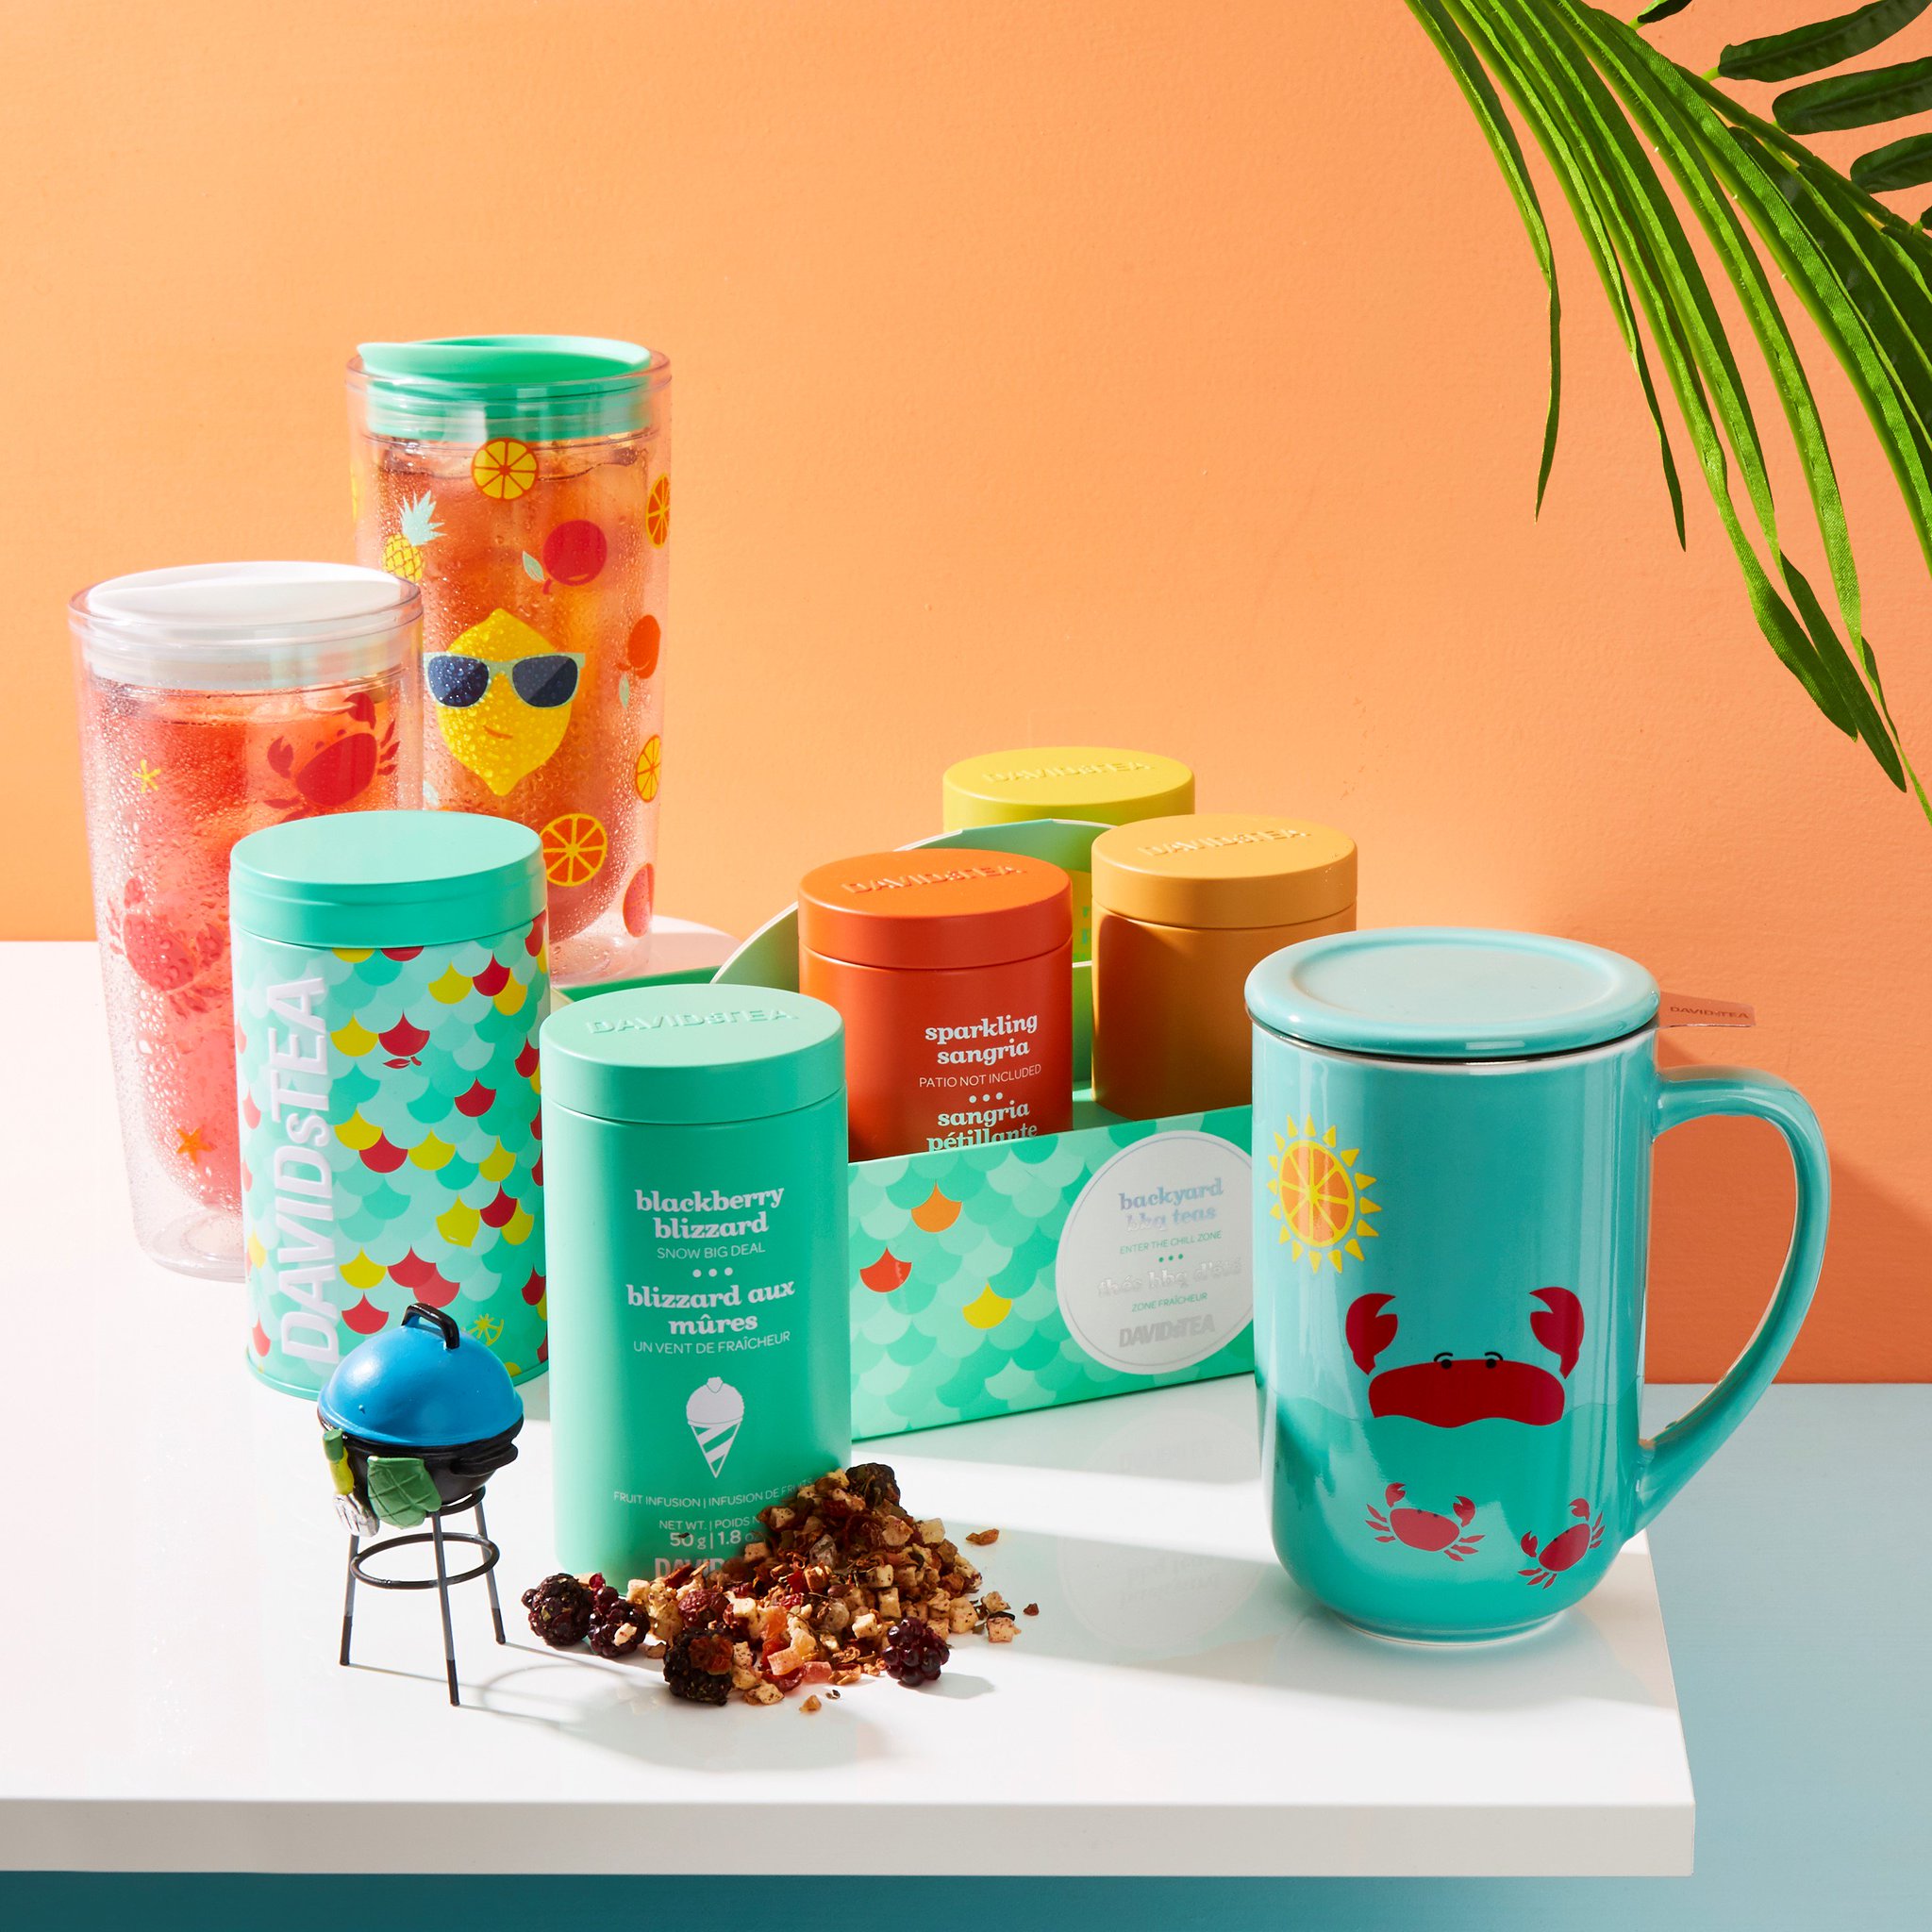 Davidstea On Twitter Bbq S Bffs Shop New Ts And Accessories Made